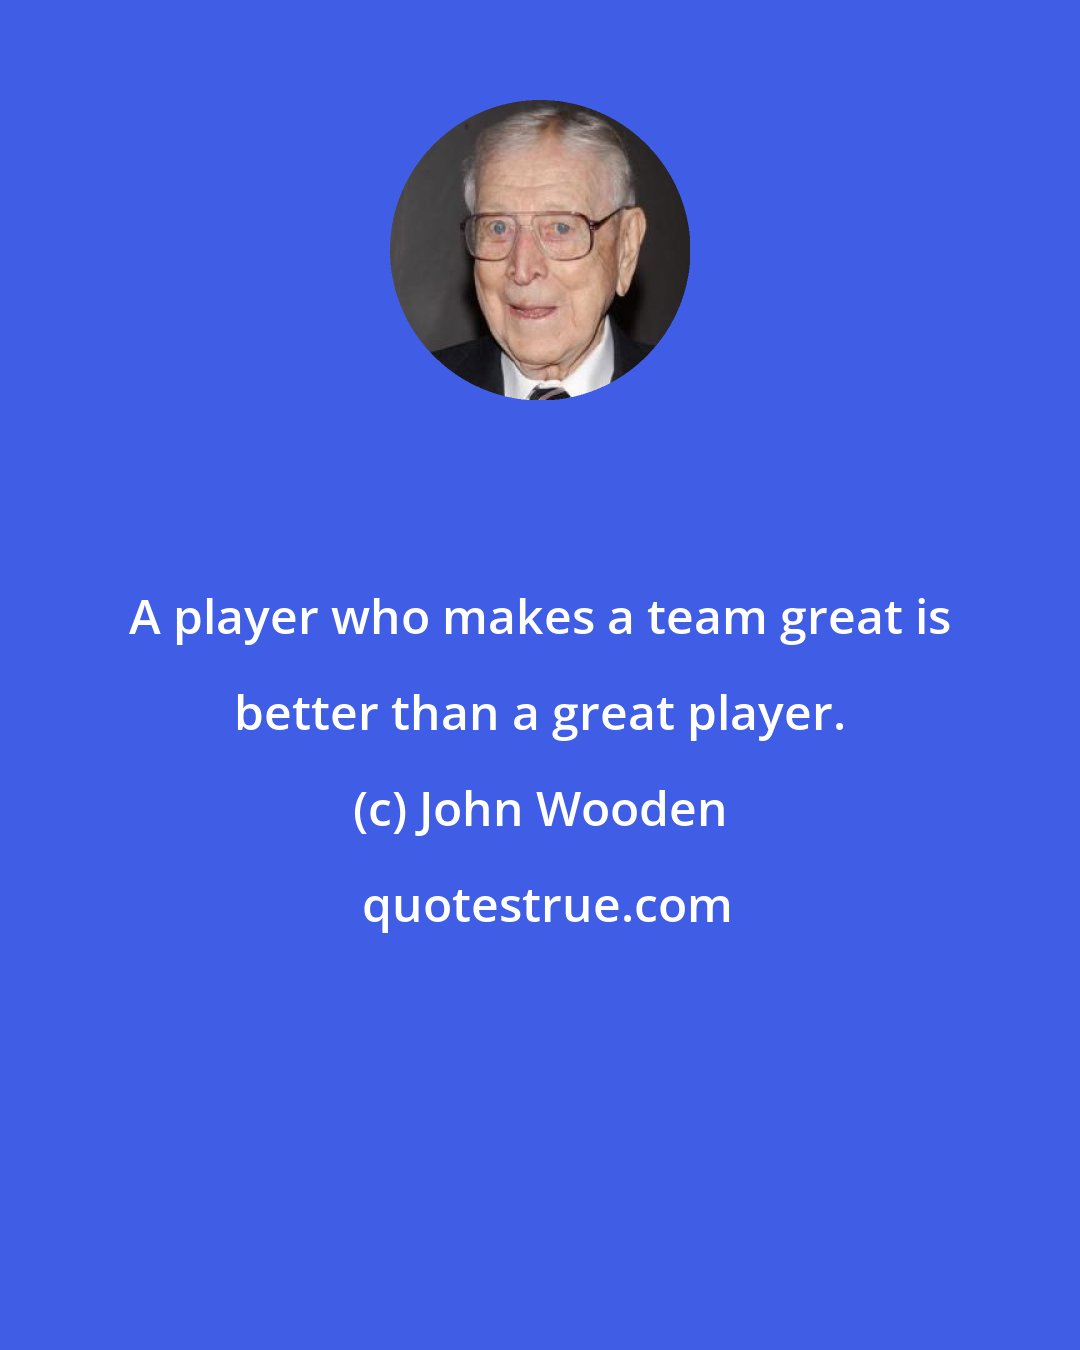 John Wooden: A player who makes a team great is better than a great player.